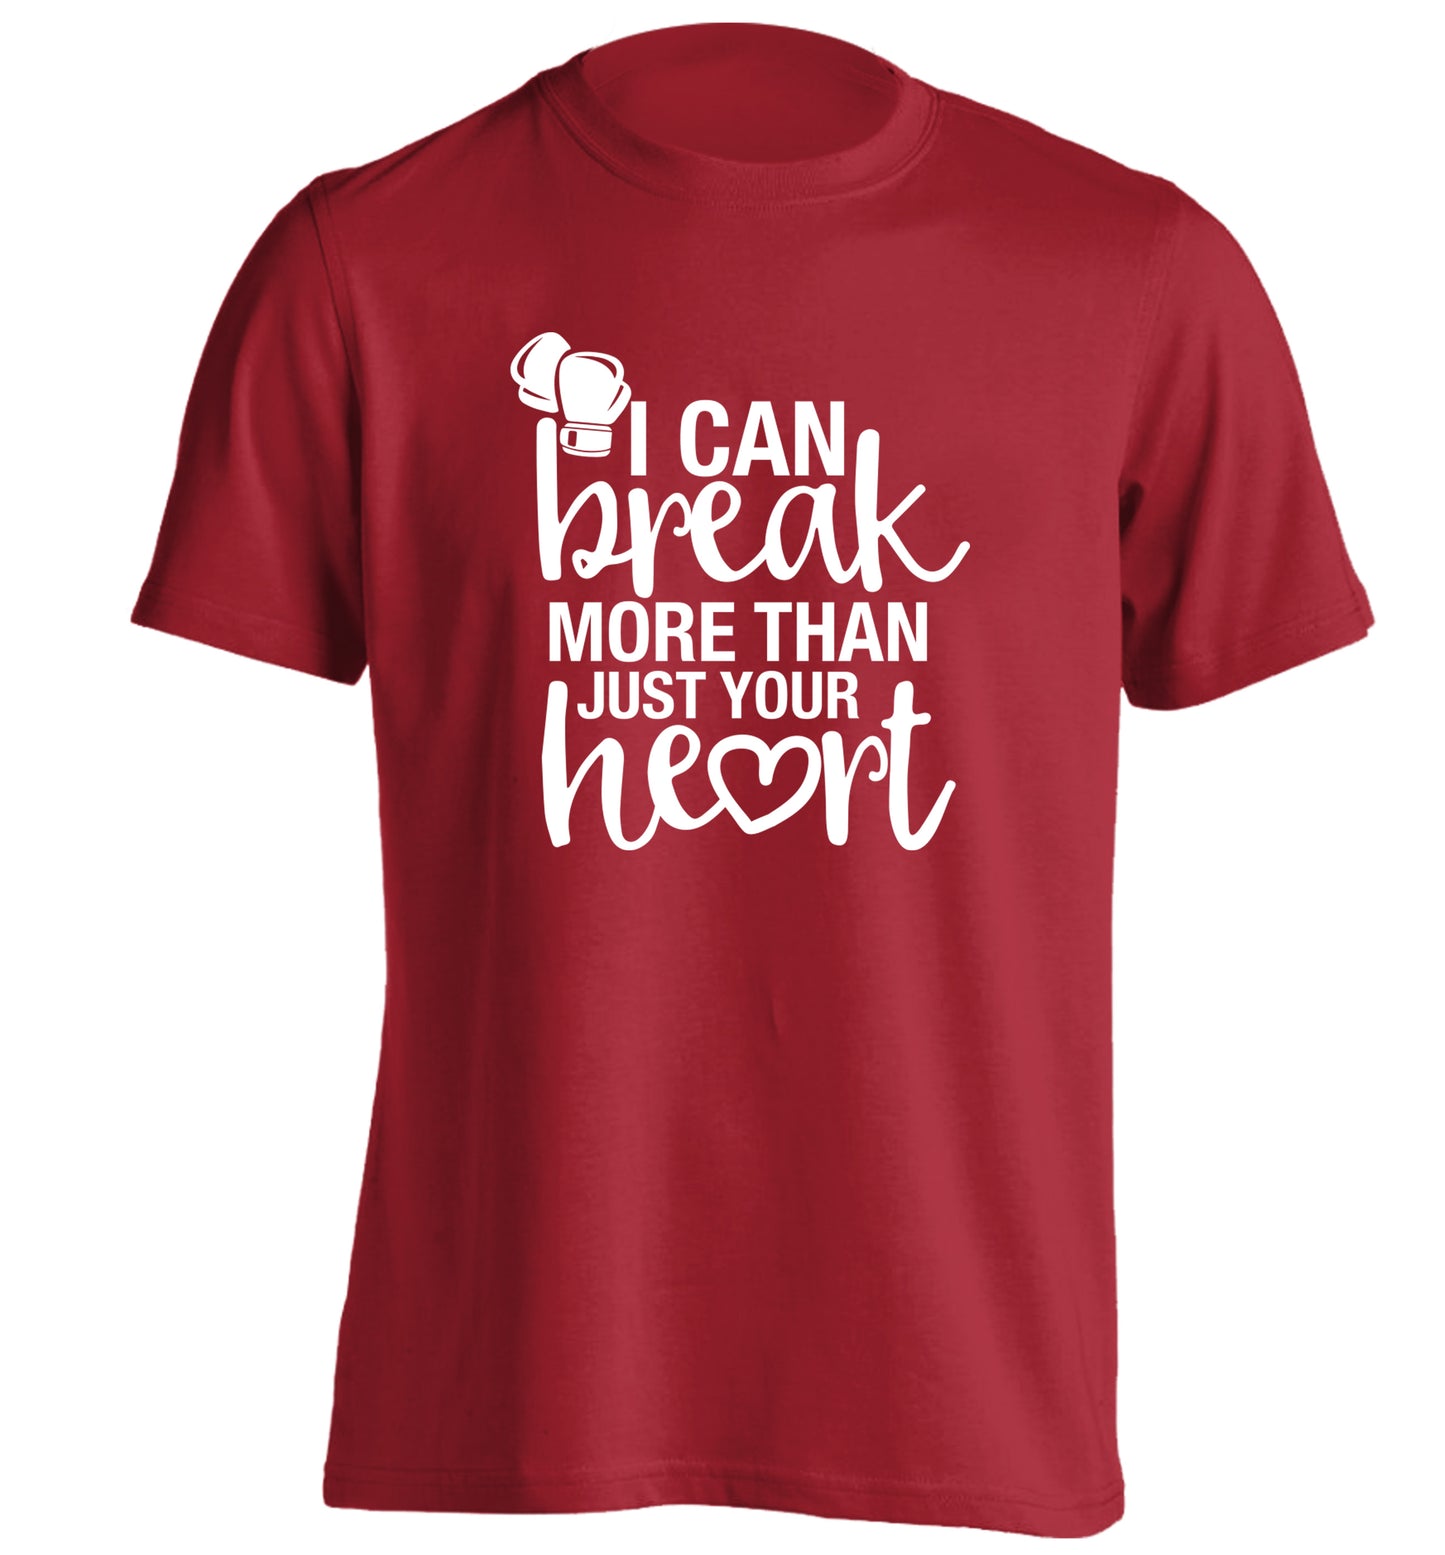 I can break more than just your heart adults unisex red Tshirt 2XL